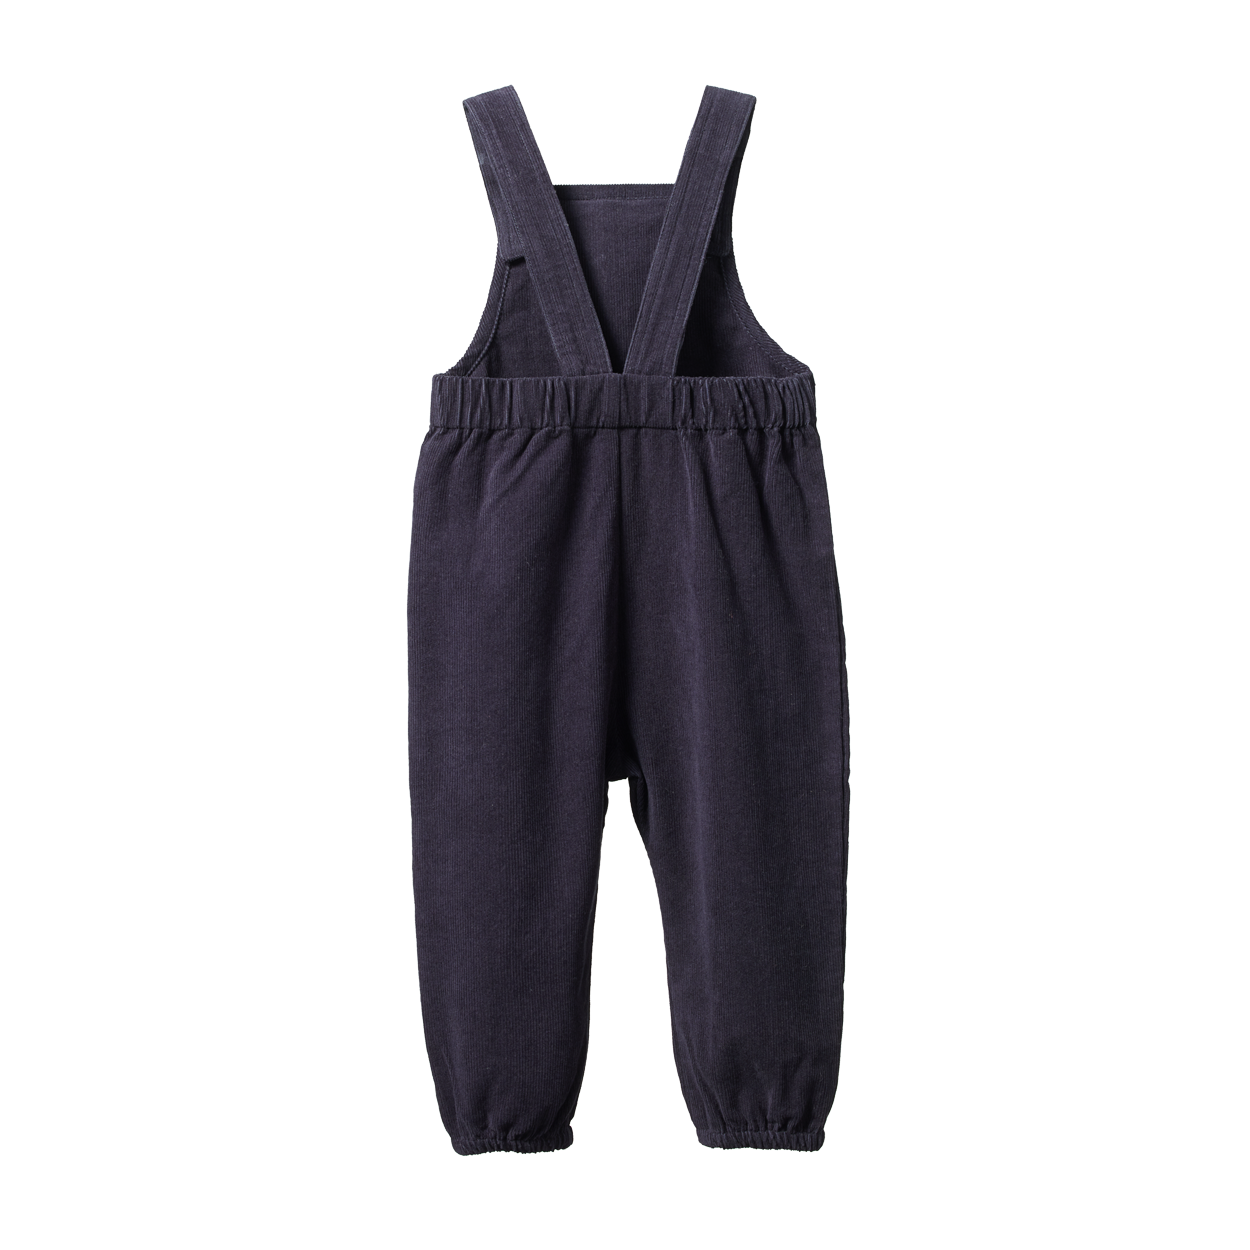 Tipper Overall's - Navy